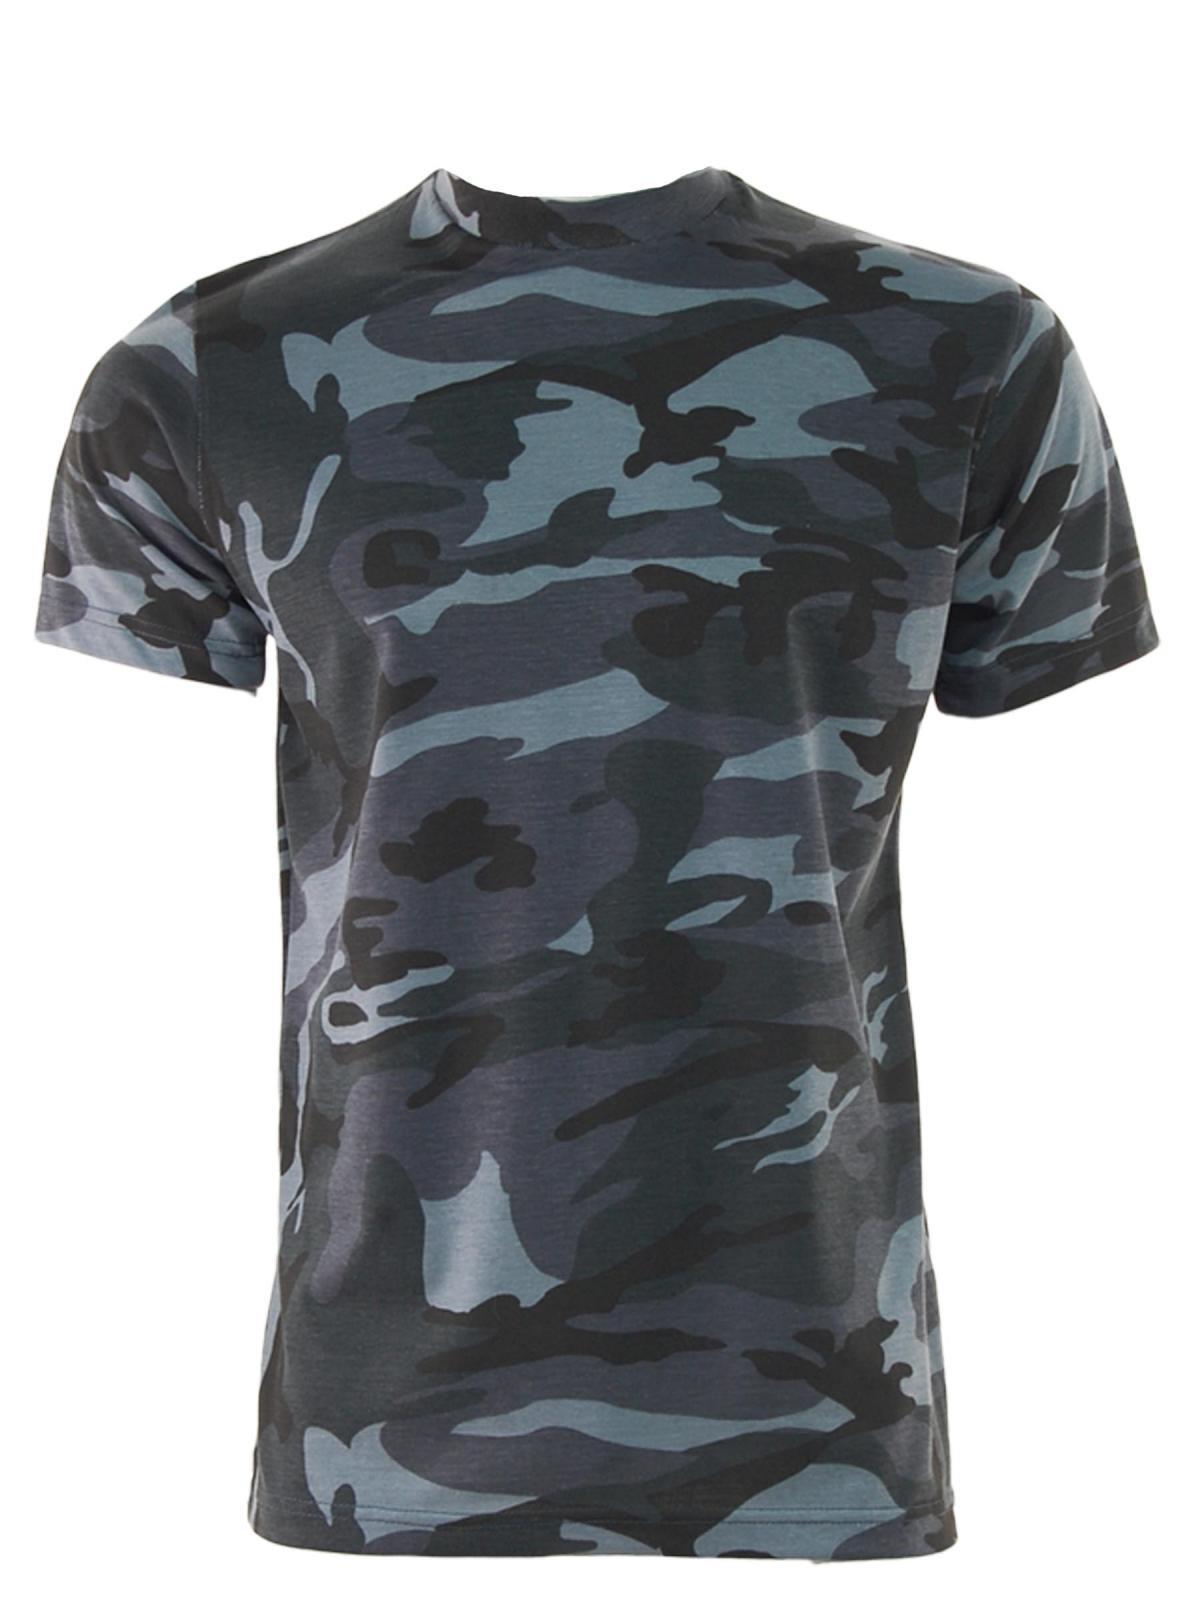 Mens GAME Camouflage Short Sleeve Camo T-Shirt Army Military Hunting Fishing | eBay